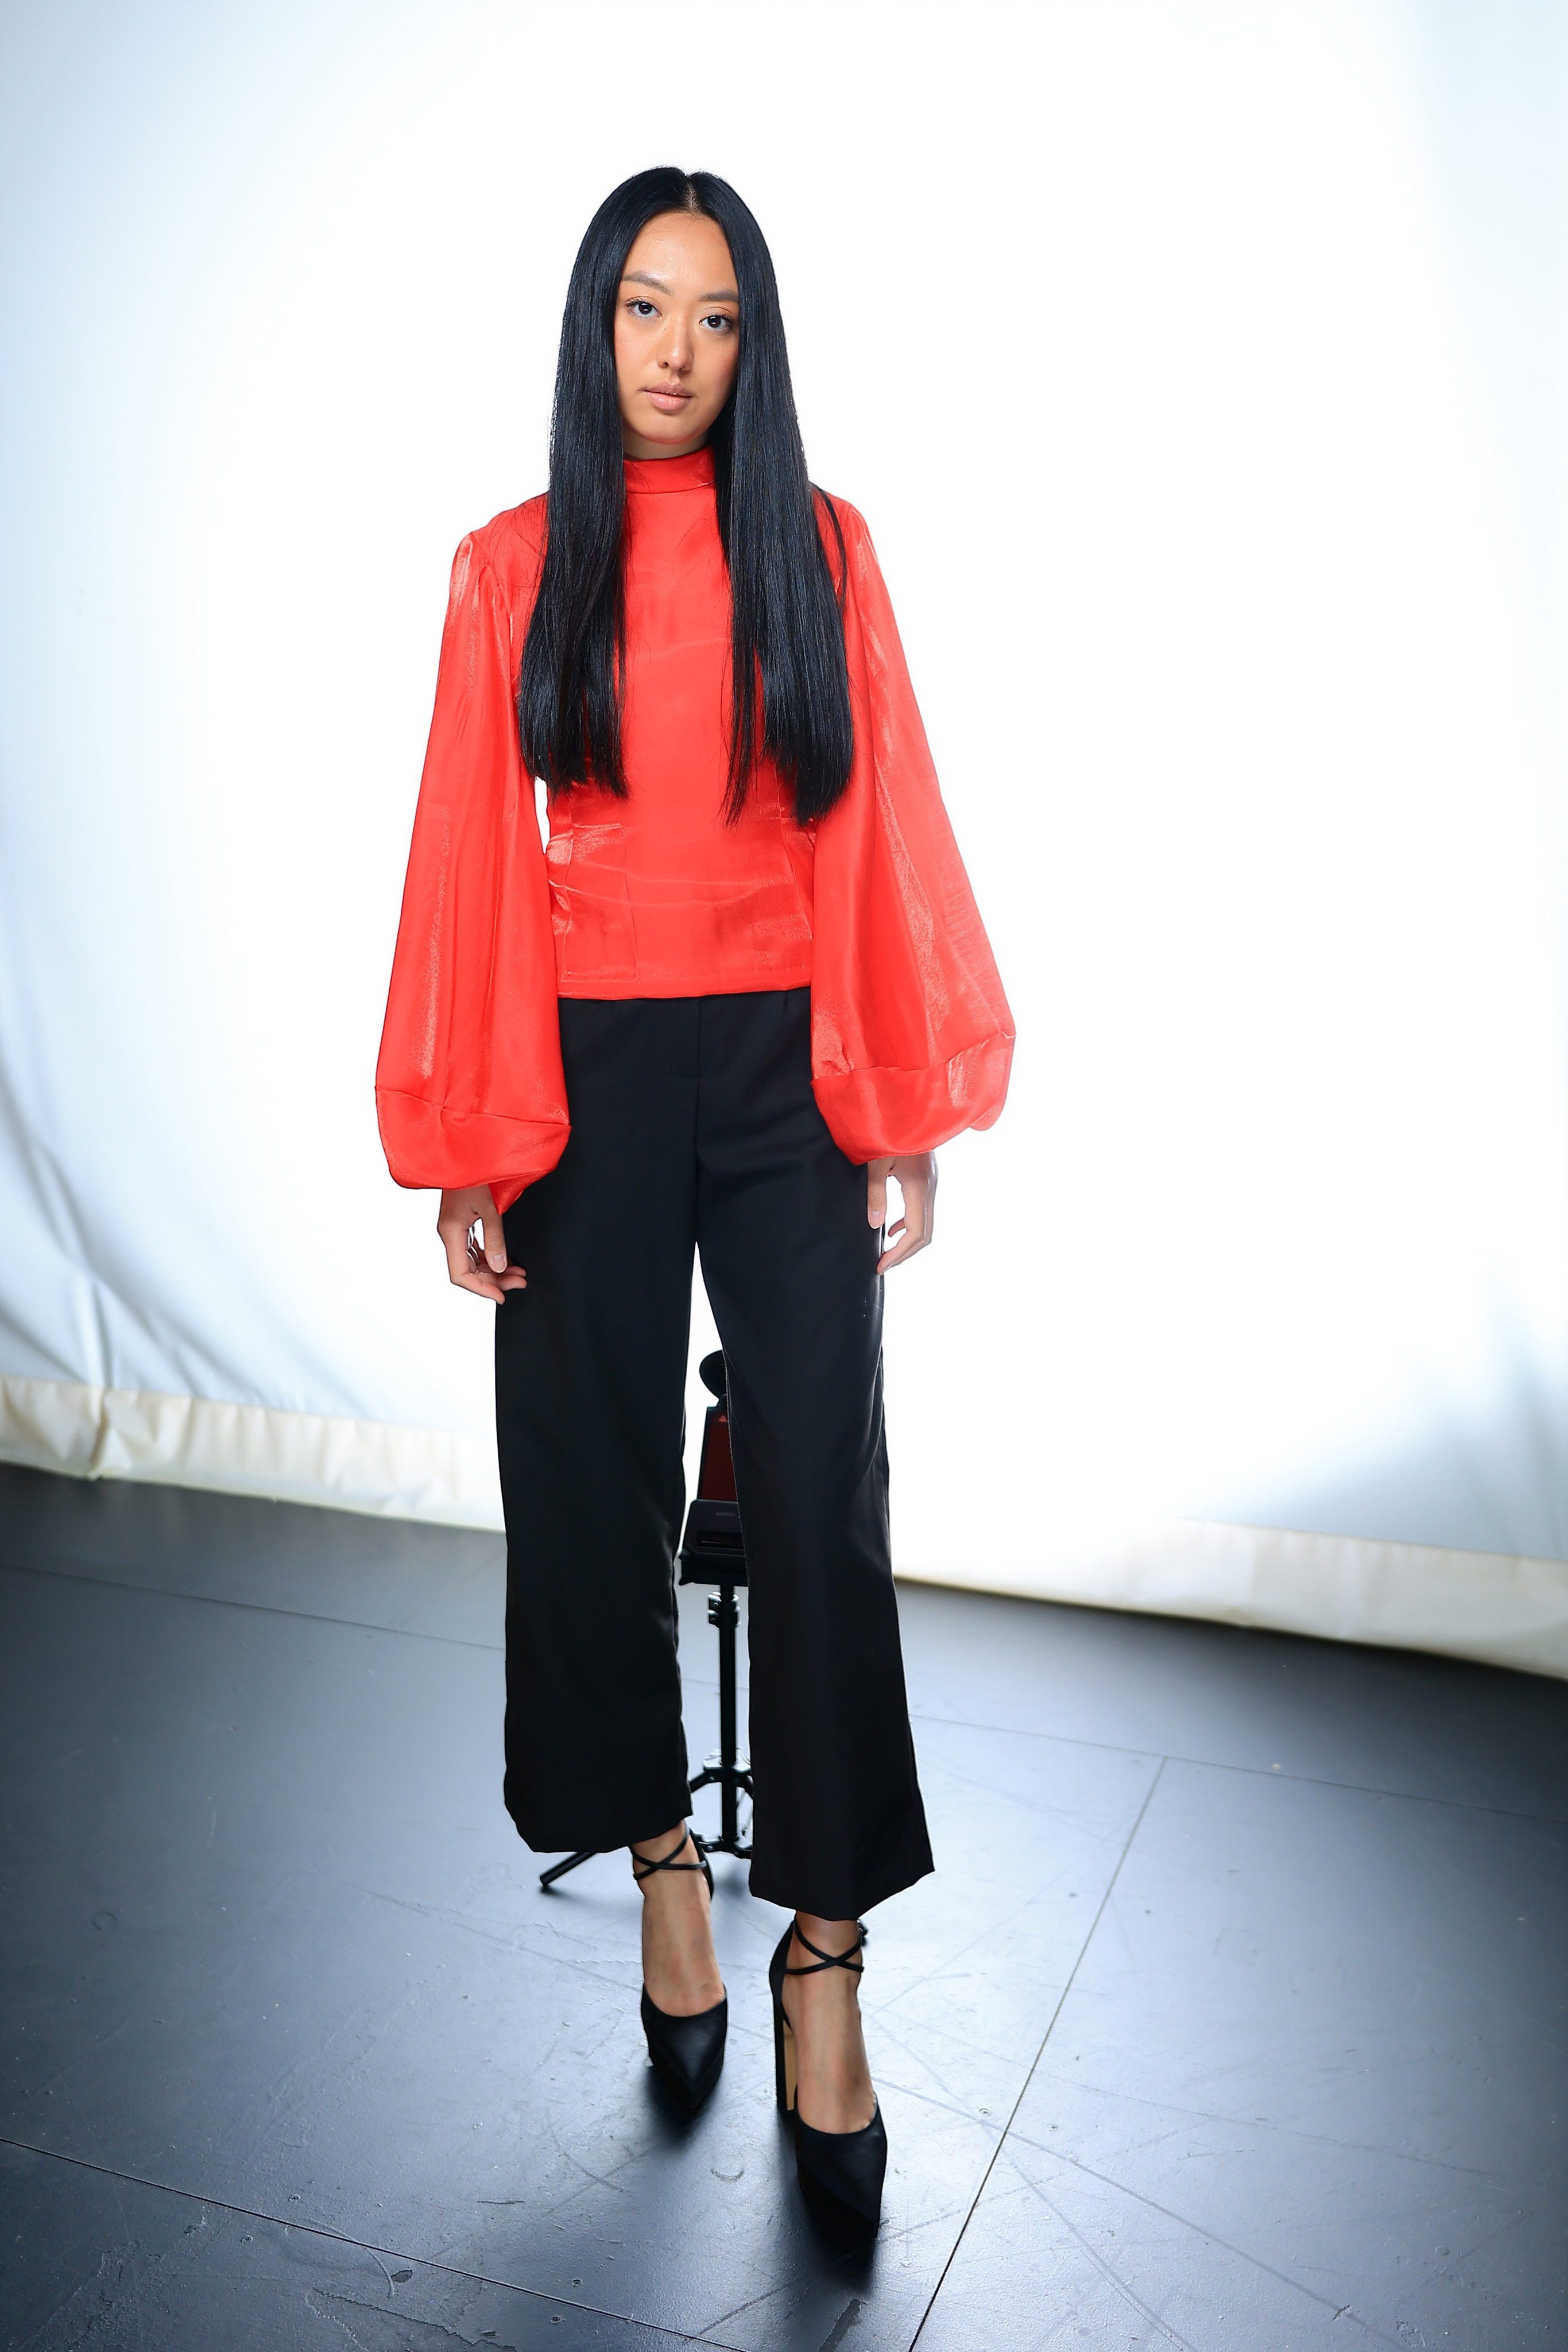 Model posing for photos wearing a red long sleeved top, black wide legged slacks and black heels.